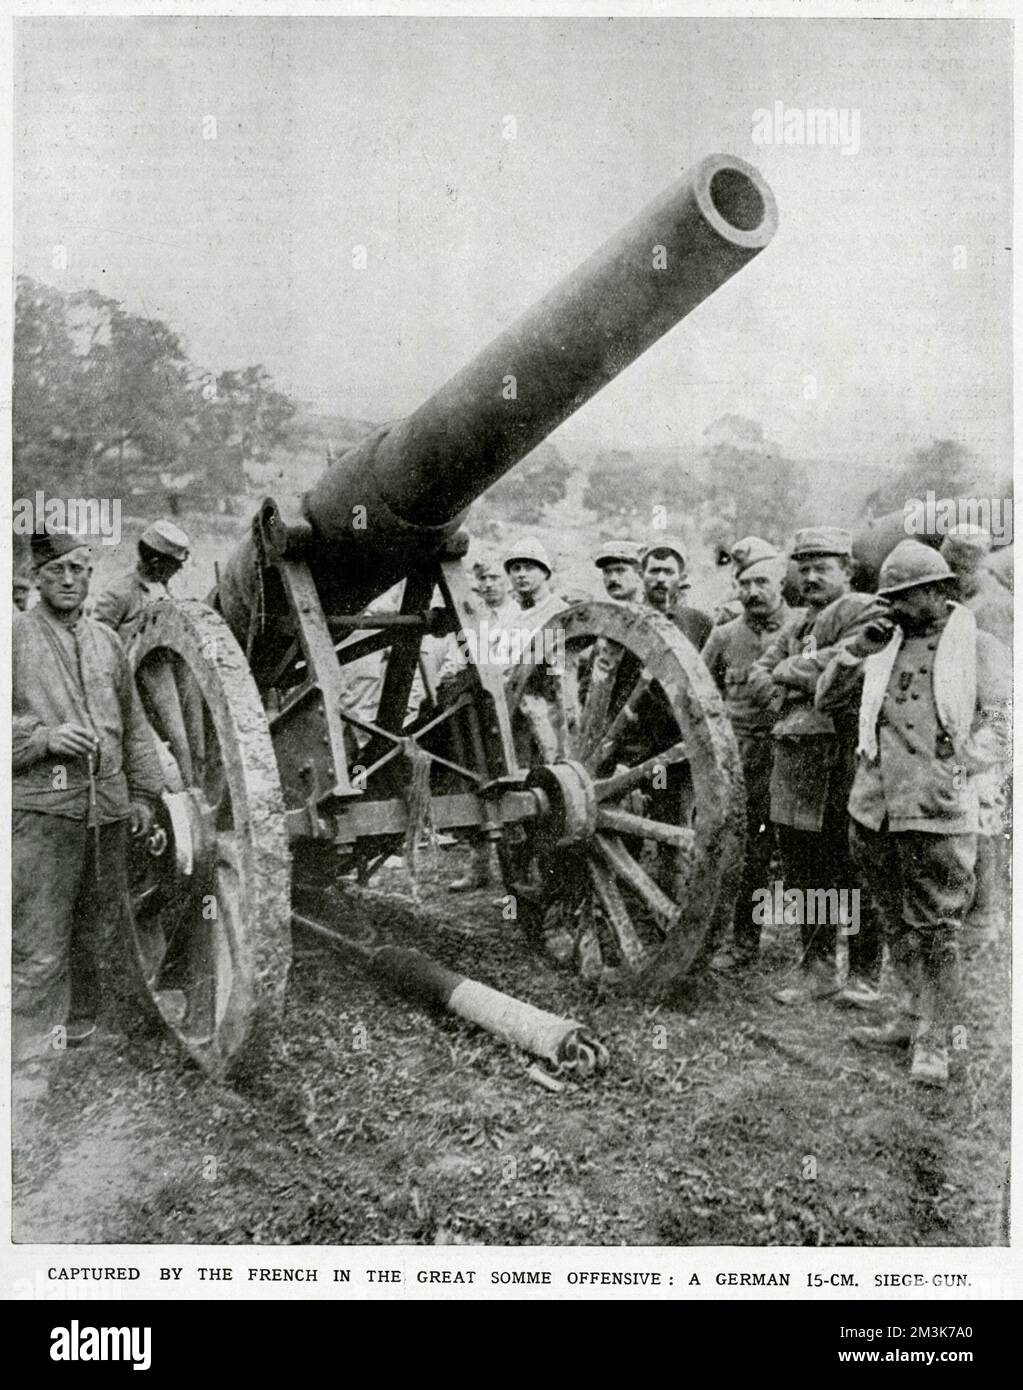 A photograph showing a German gun captured by French soldiers during the Battle of the Somme.  Intended to be a decisive breakthrough, the Battle of the Somme instead became a futile and indiscriminate slaughter, with General Haig's tactics remaining controversial even today.  The four and a half month campaign eventually gave way to a stalemate and by mid-November the offensive was over.  The British forces were decimated with 420,000 casualties, among them many of the new voluntary battalions.  1916 Stock Photo